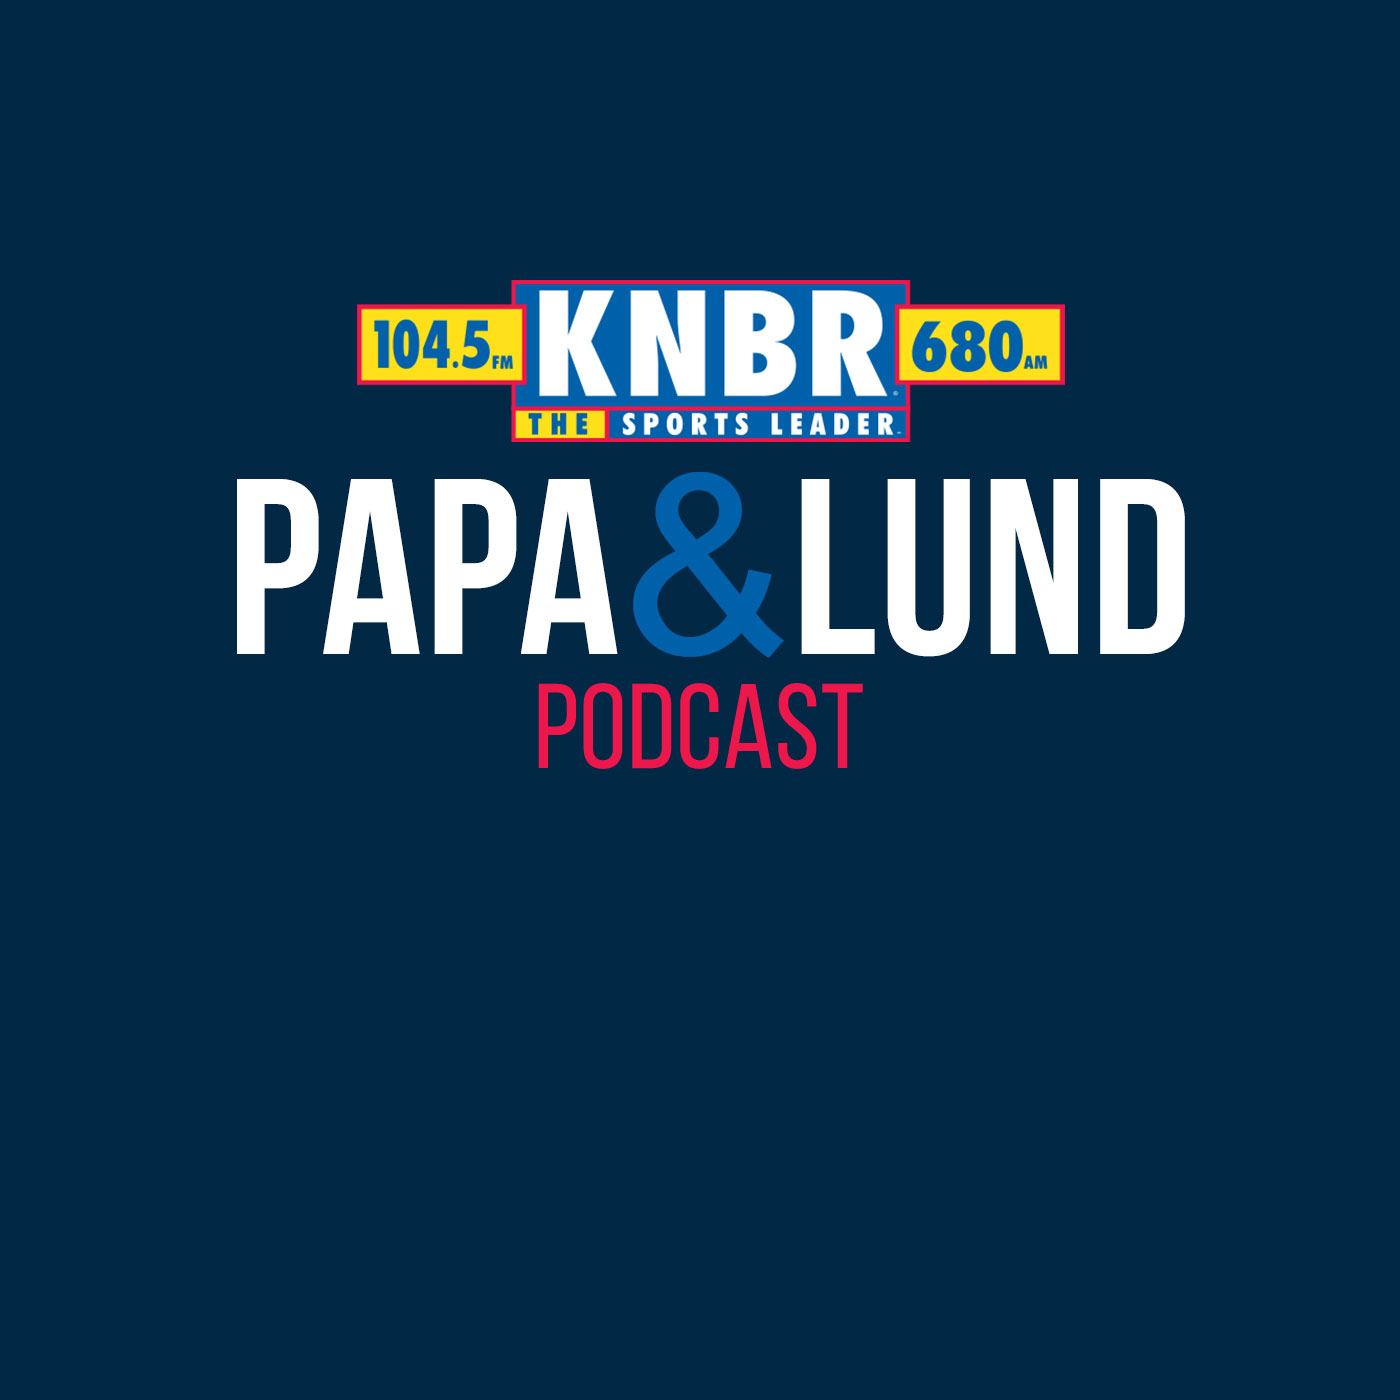 6-7 Andrew Baggarly joined Papa & Lund to discuss Heliot Ramos' performance the past few weeks